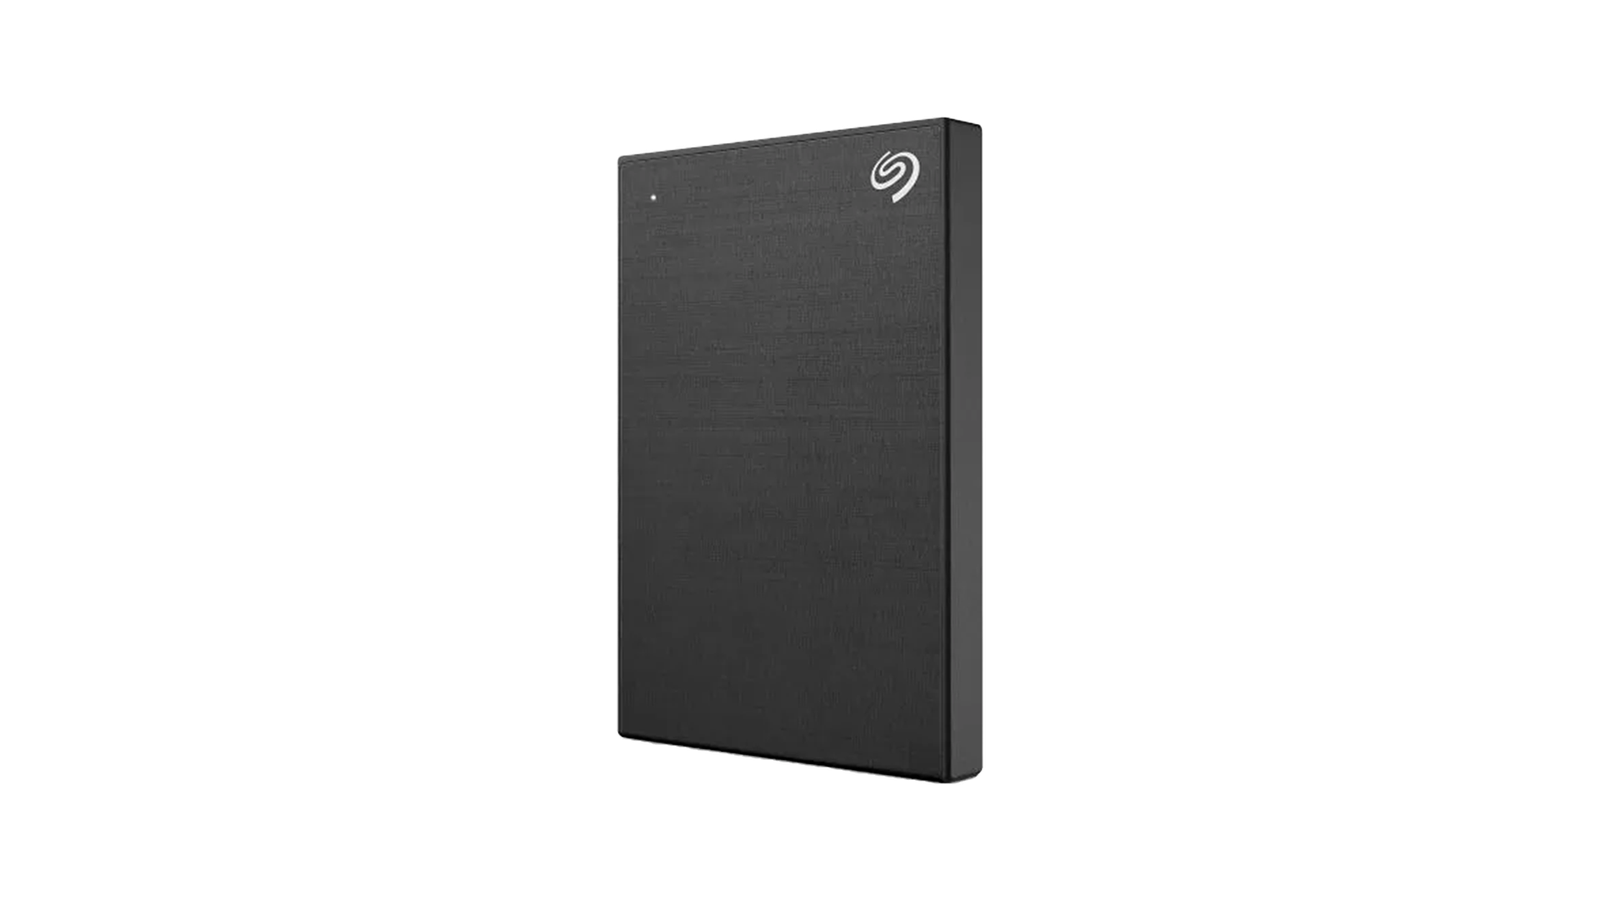 Seagate Backup Plus Desktop Drive - Great backup solution for PC and Mac